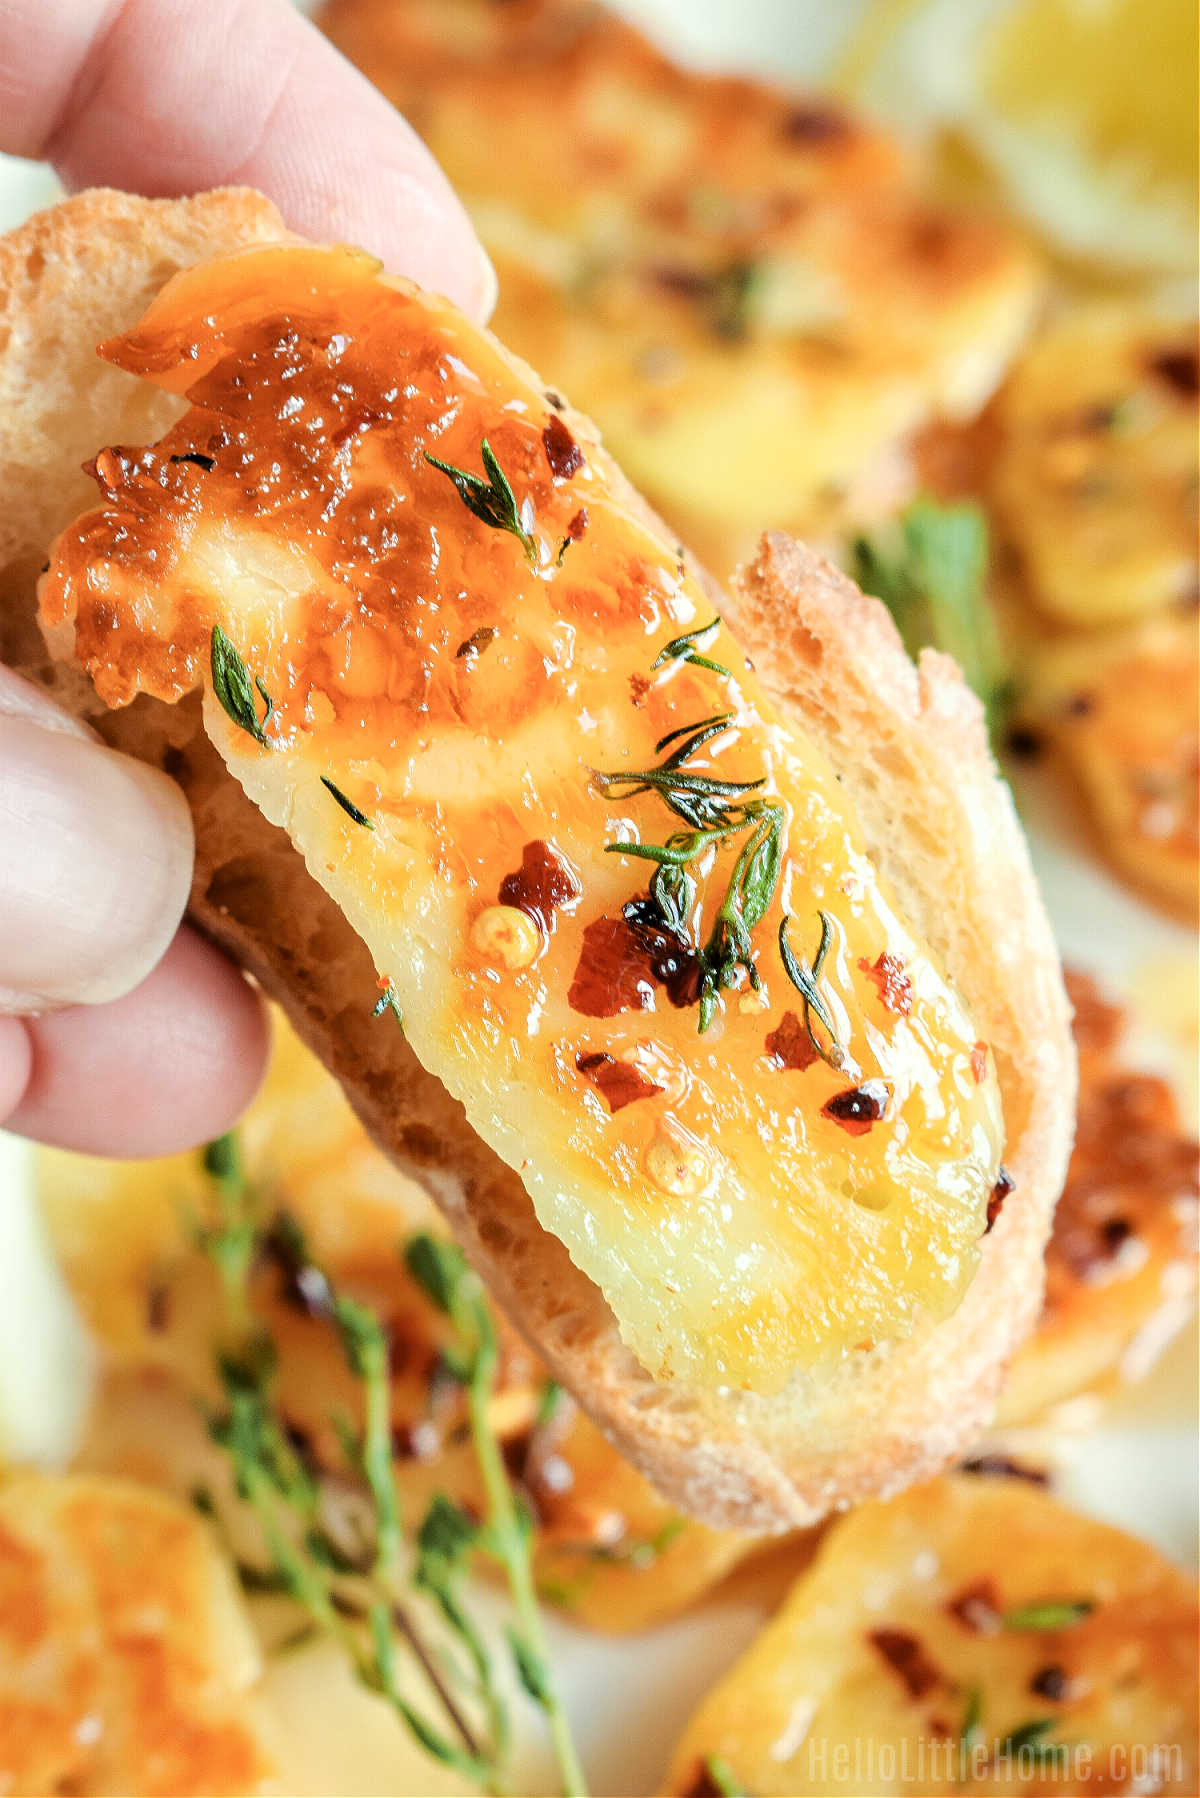 A hand holding a slice of crostini topped with fried halloumi.